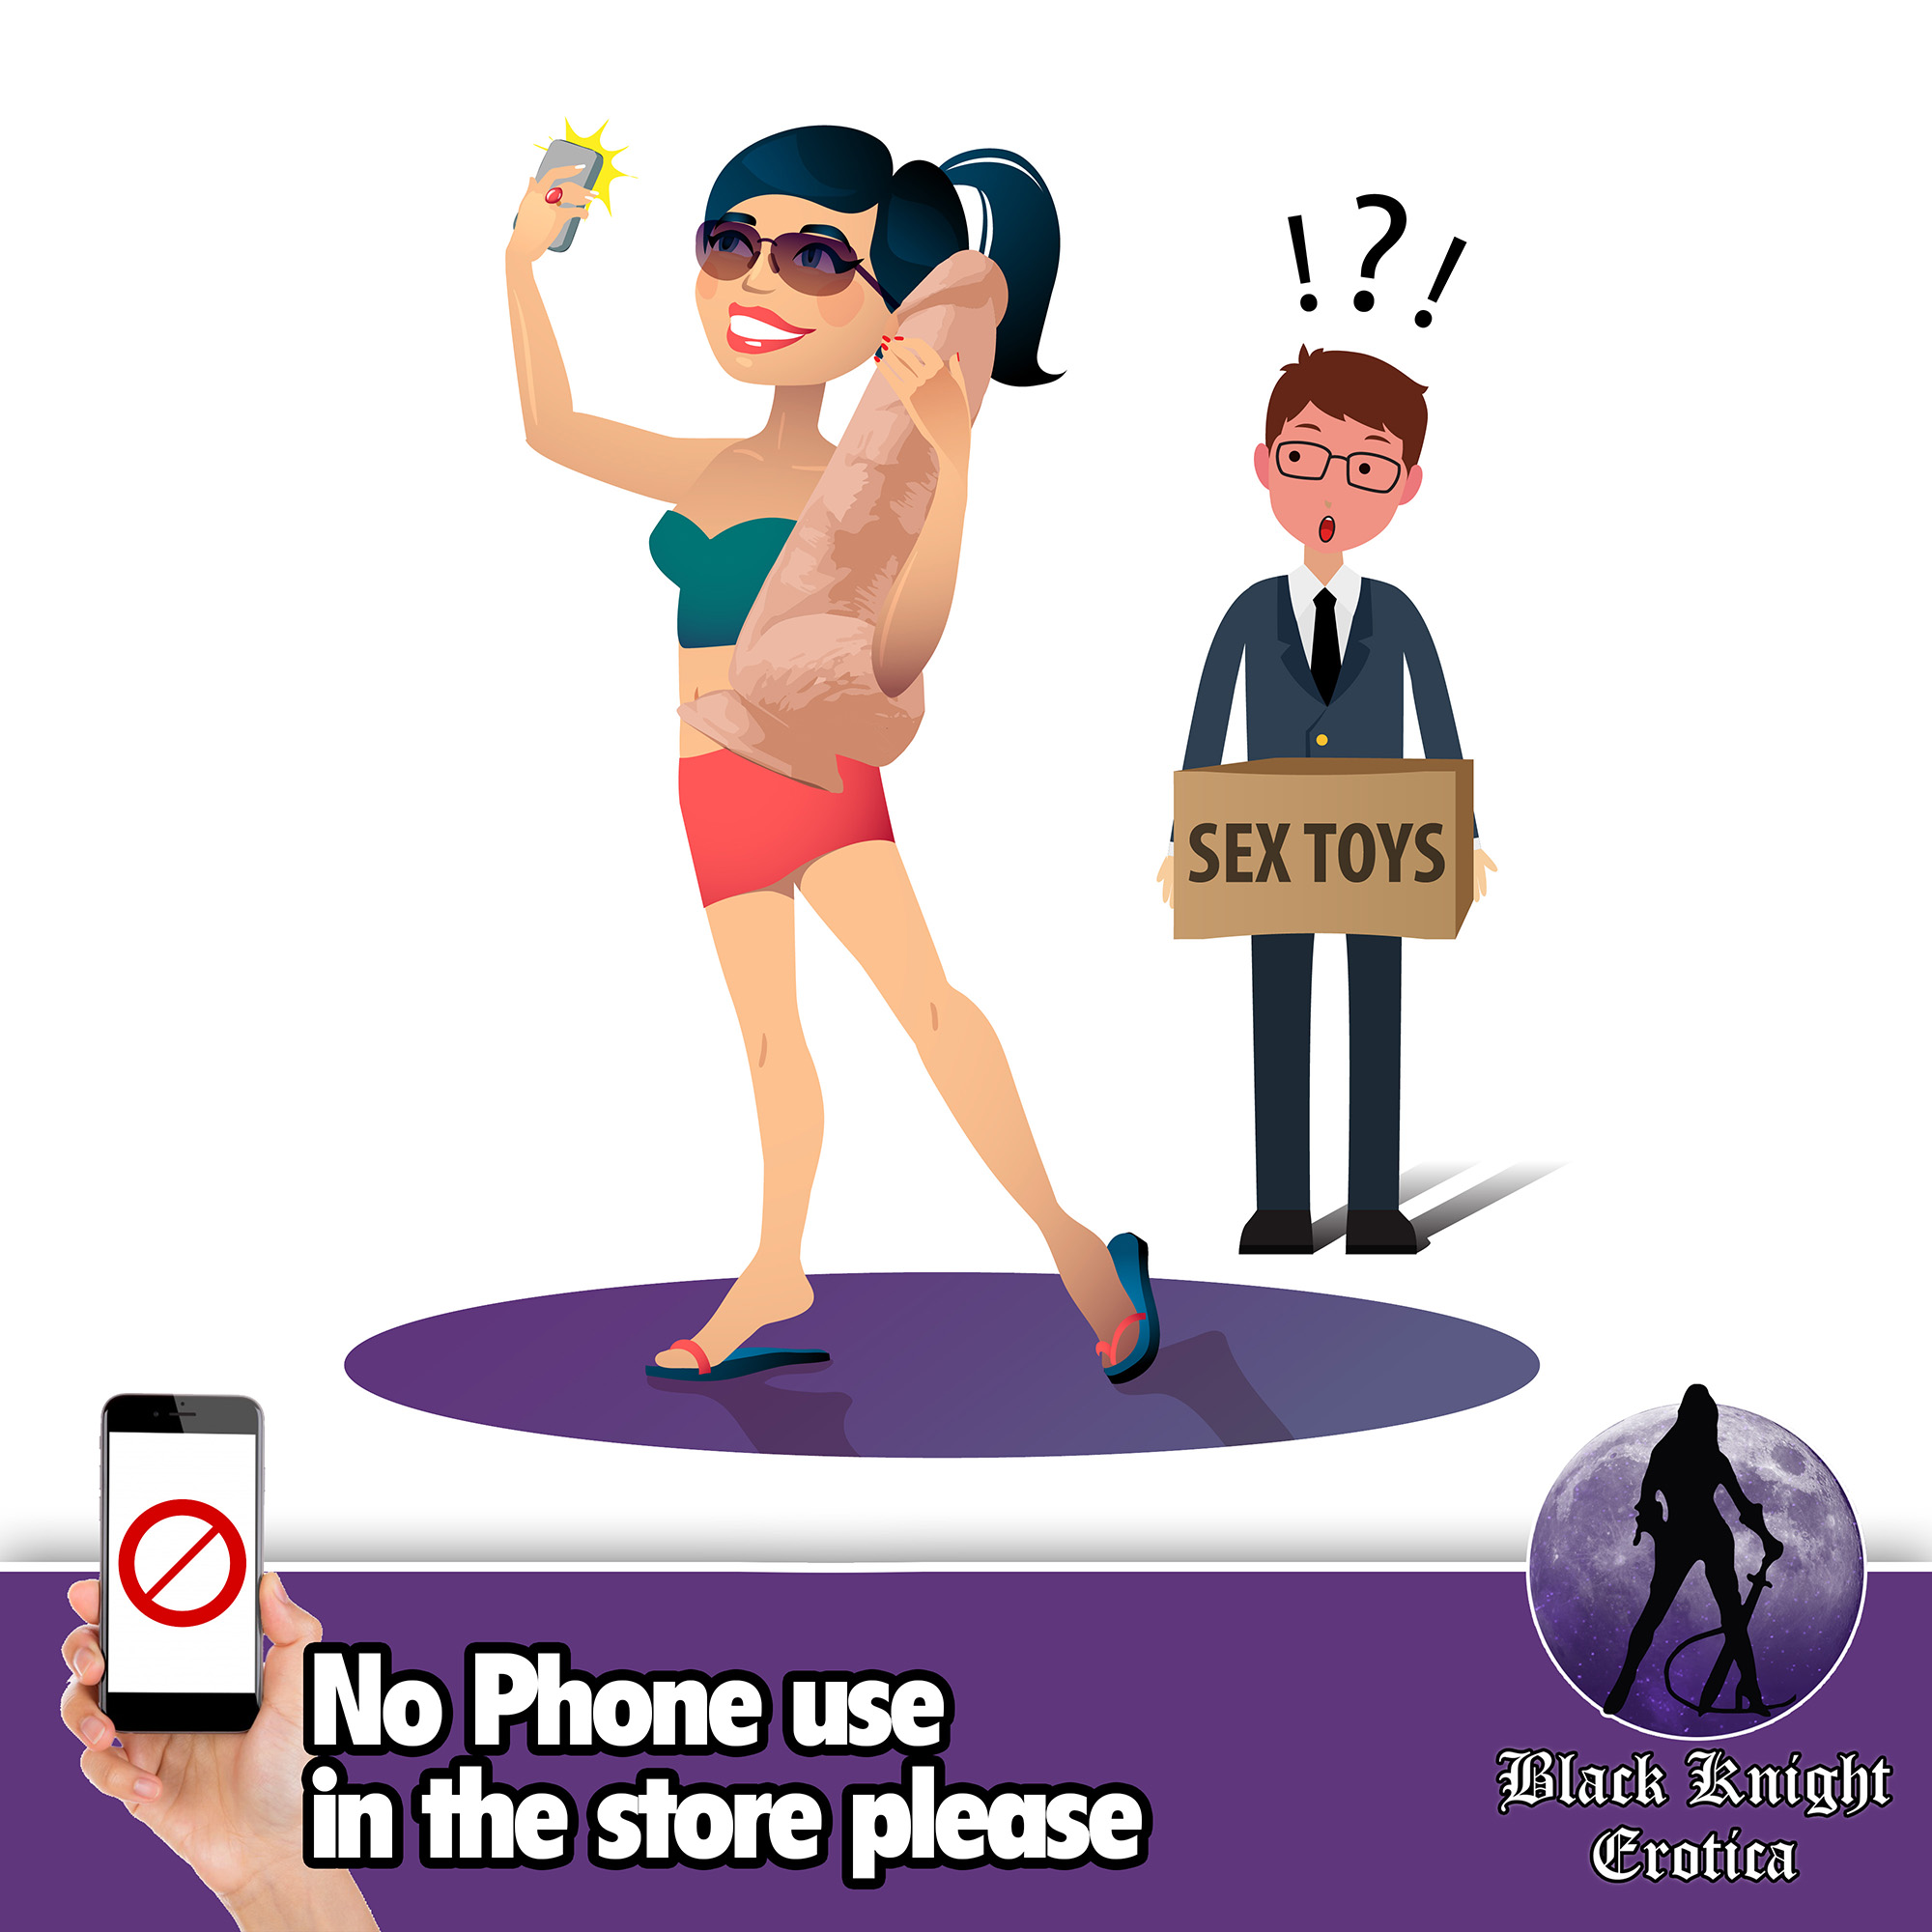 Modified Image by Cory J - 2 Vector Images Originally Designed by FreePik: https://www.freepik.com/free-vector/girl-on-beach-taking-selfie_715871.htm https://www.freepik.com/free-vector/great-businessman-character-with-six-different-facial-expressions_1087164.htm